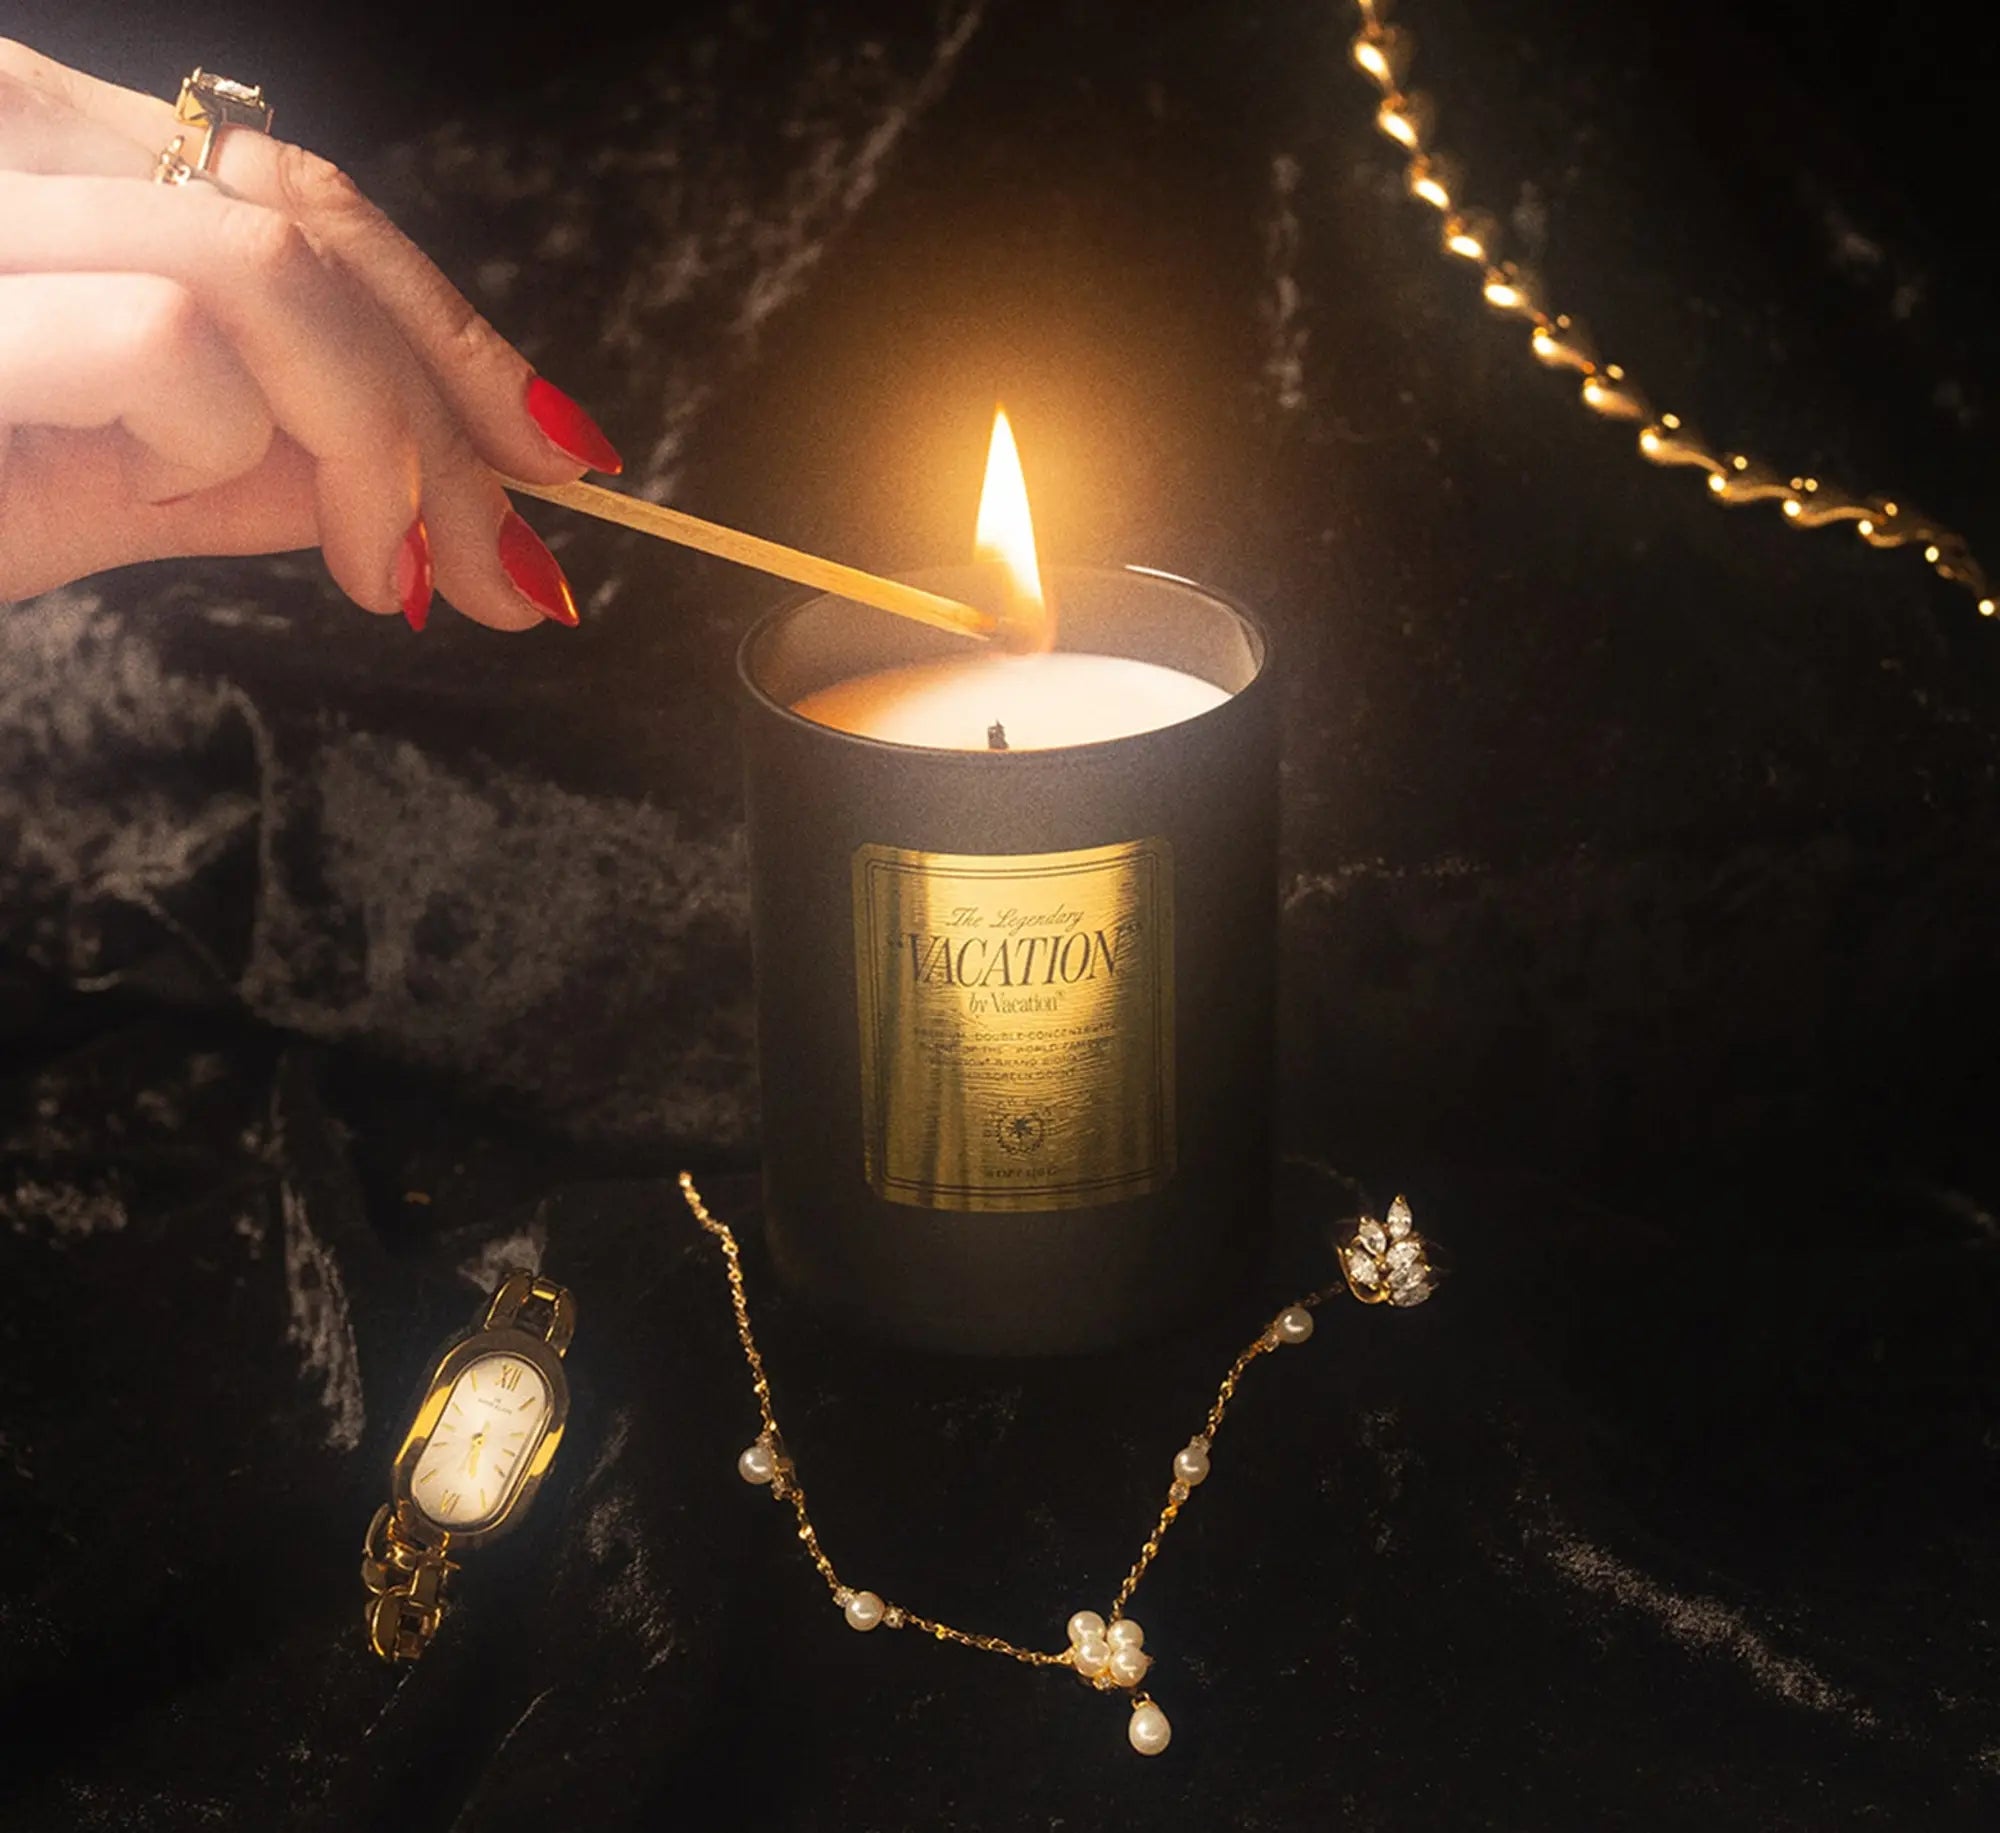 "VACATION" by Vacation® BLACK LABEL Candle